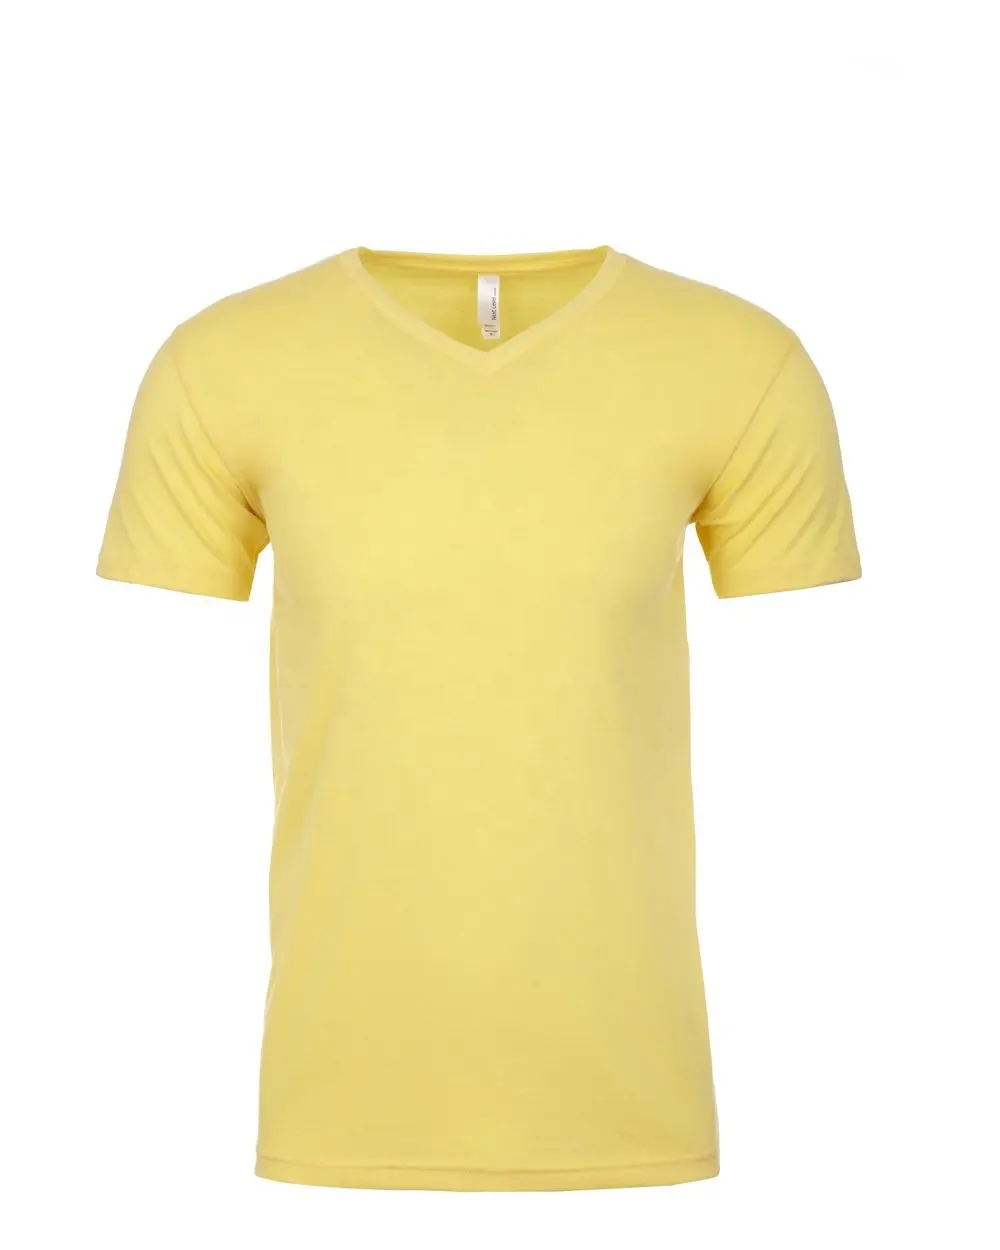 Next Level 6440 Style Sueded V-Neck T-Shirt Banana Cream 60/40 combed cotton/polyester sueded jersey Breathable Sueded T-Shirt